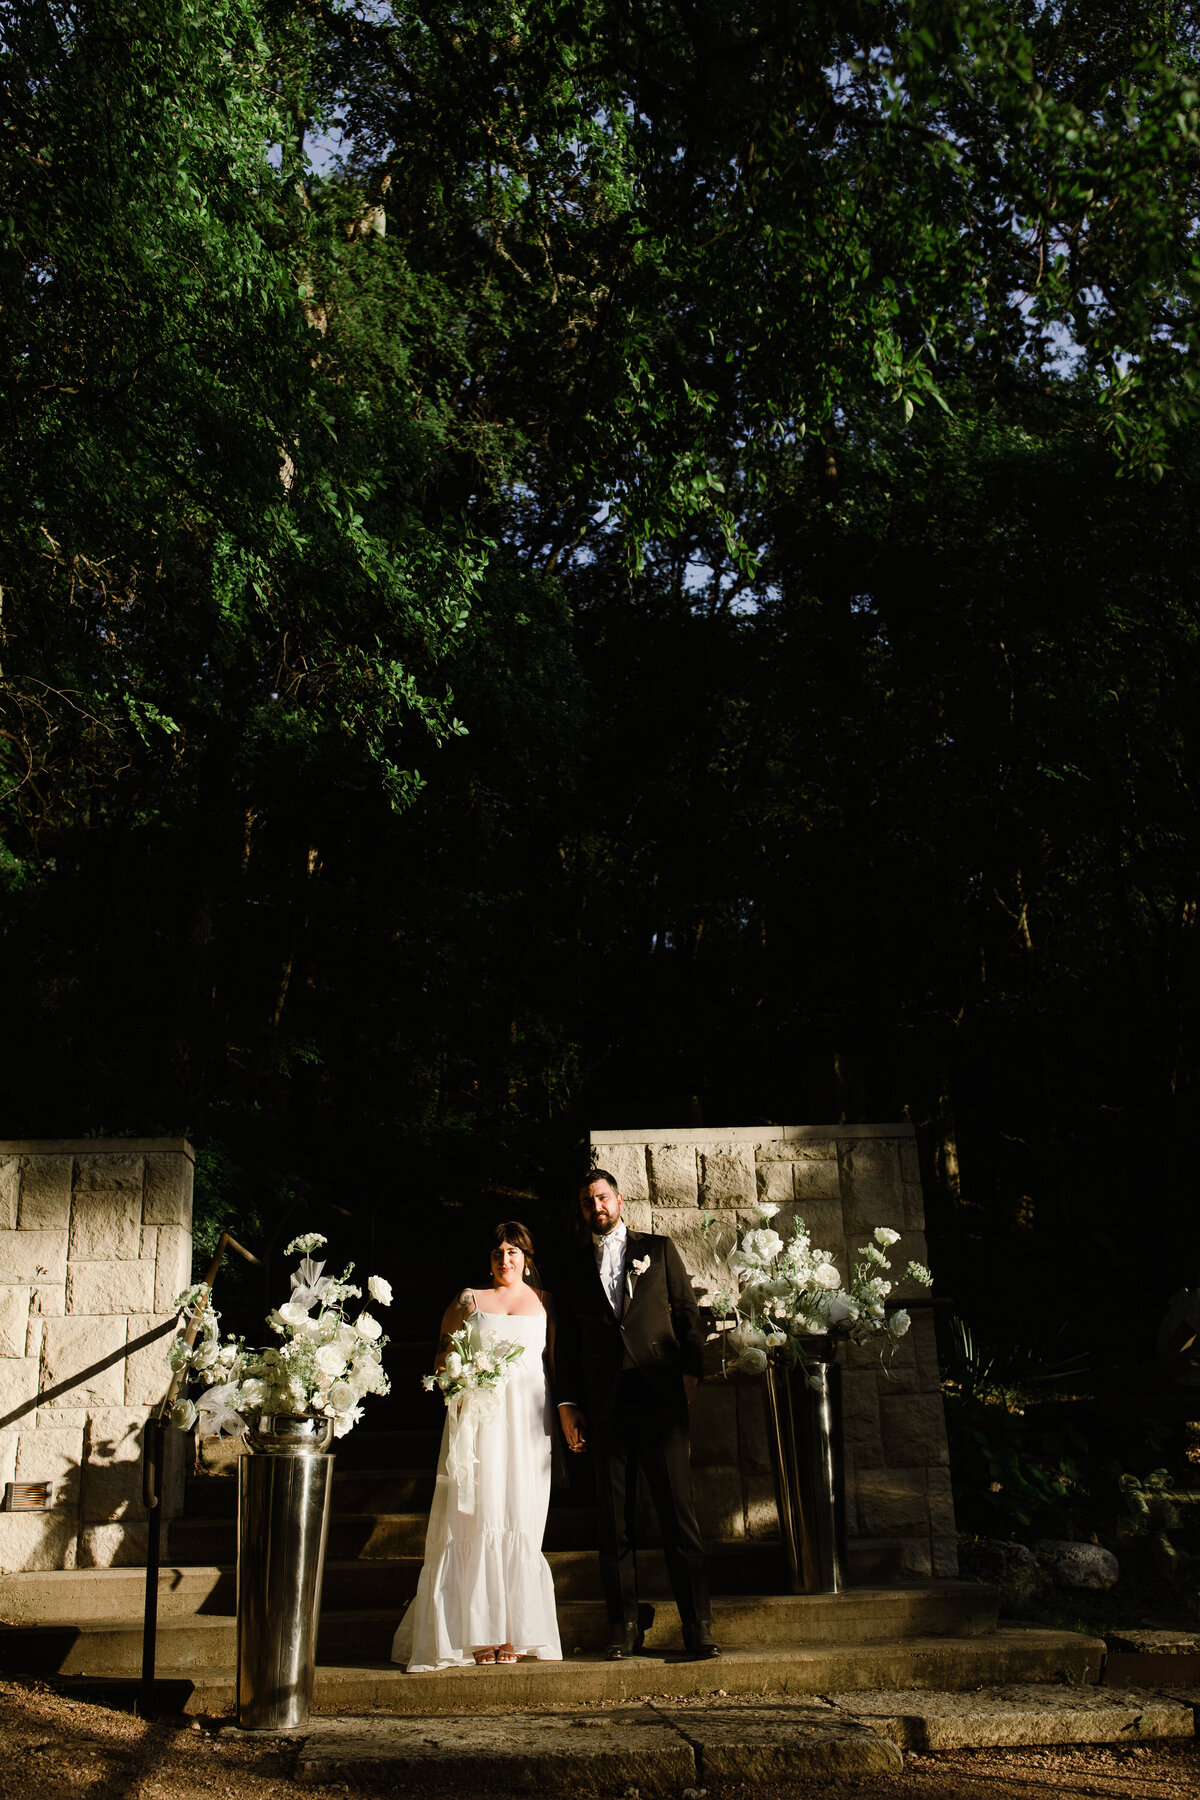 Bride and groom at ceremony site at night at Couple portraits in the grounds of Umlauf Sculpture Garden, Austin